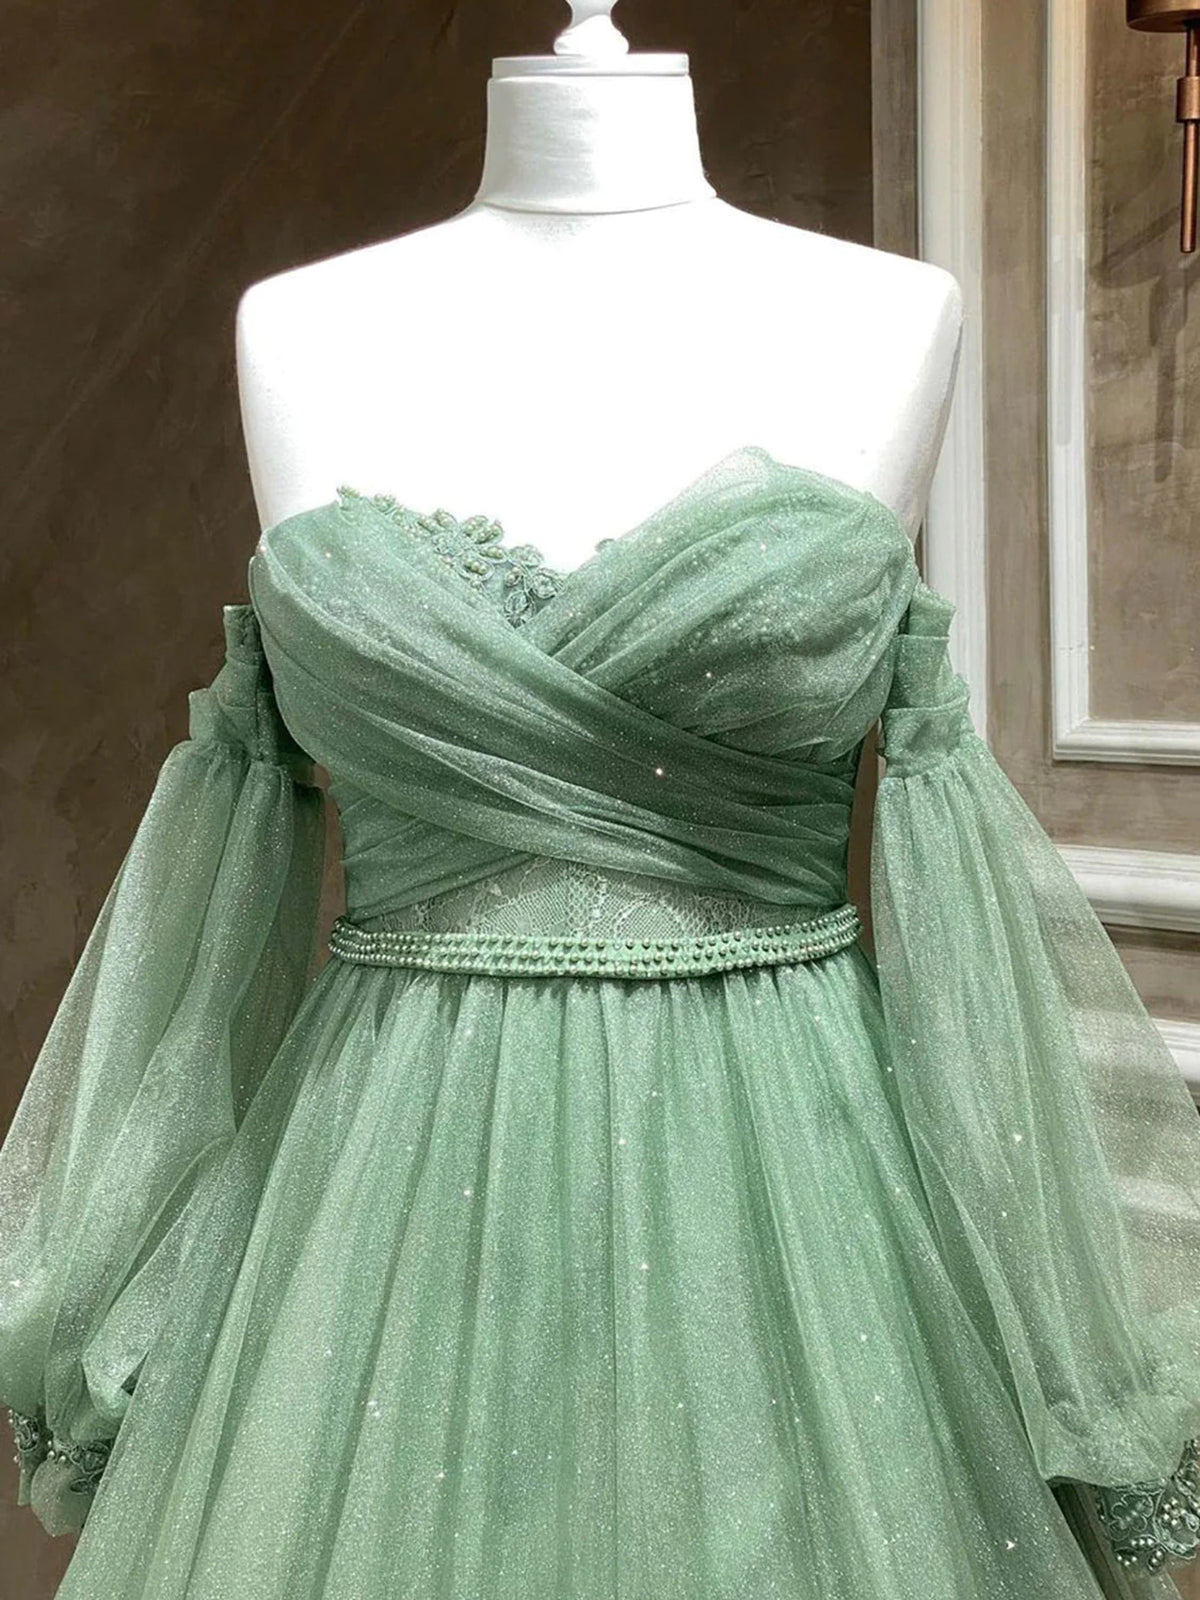 Bridesmaid Dresses Green, A Line Sweetheart Neck Long Sleeves Green Tulle Long Prom Dress, Long Green Formal Evening Dress